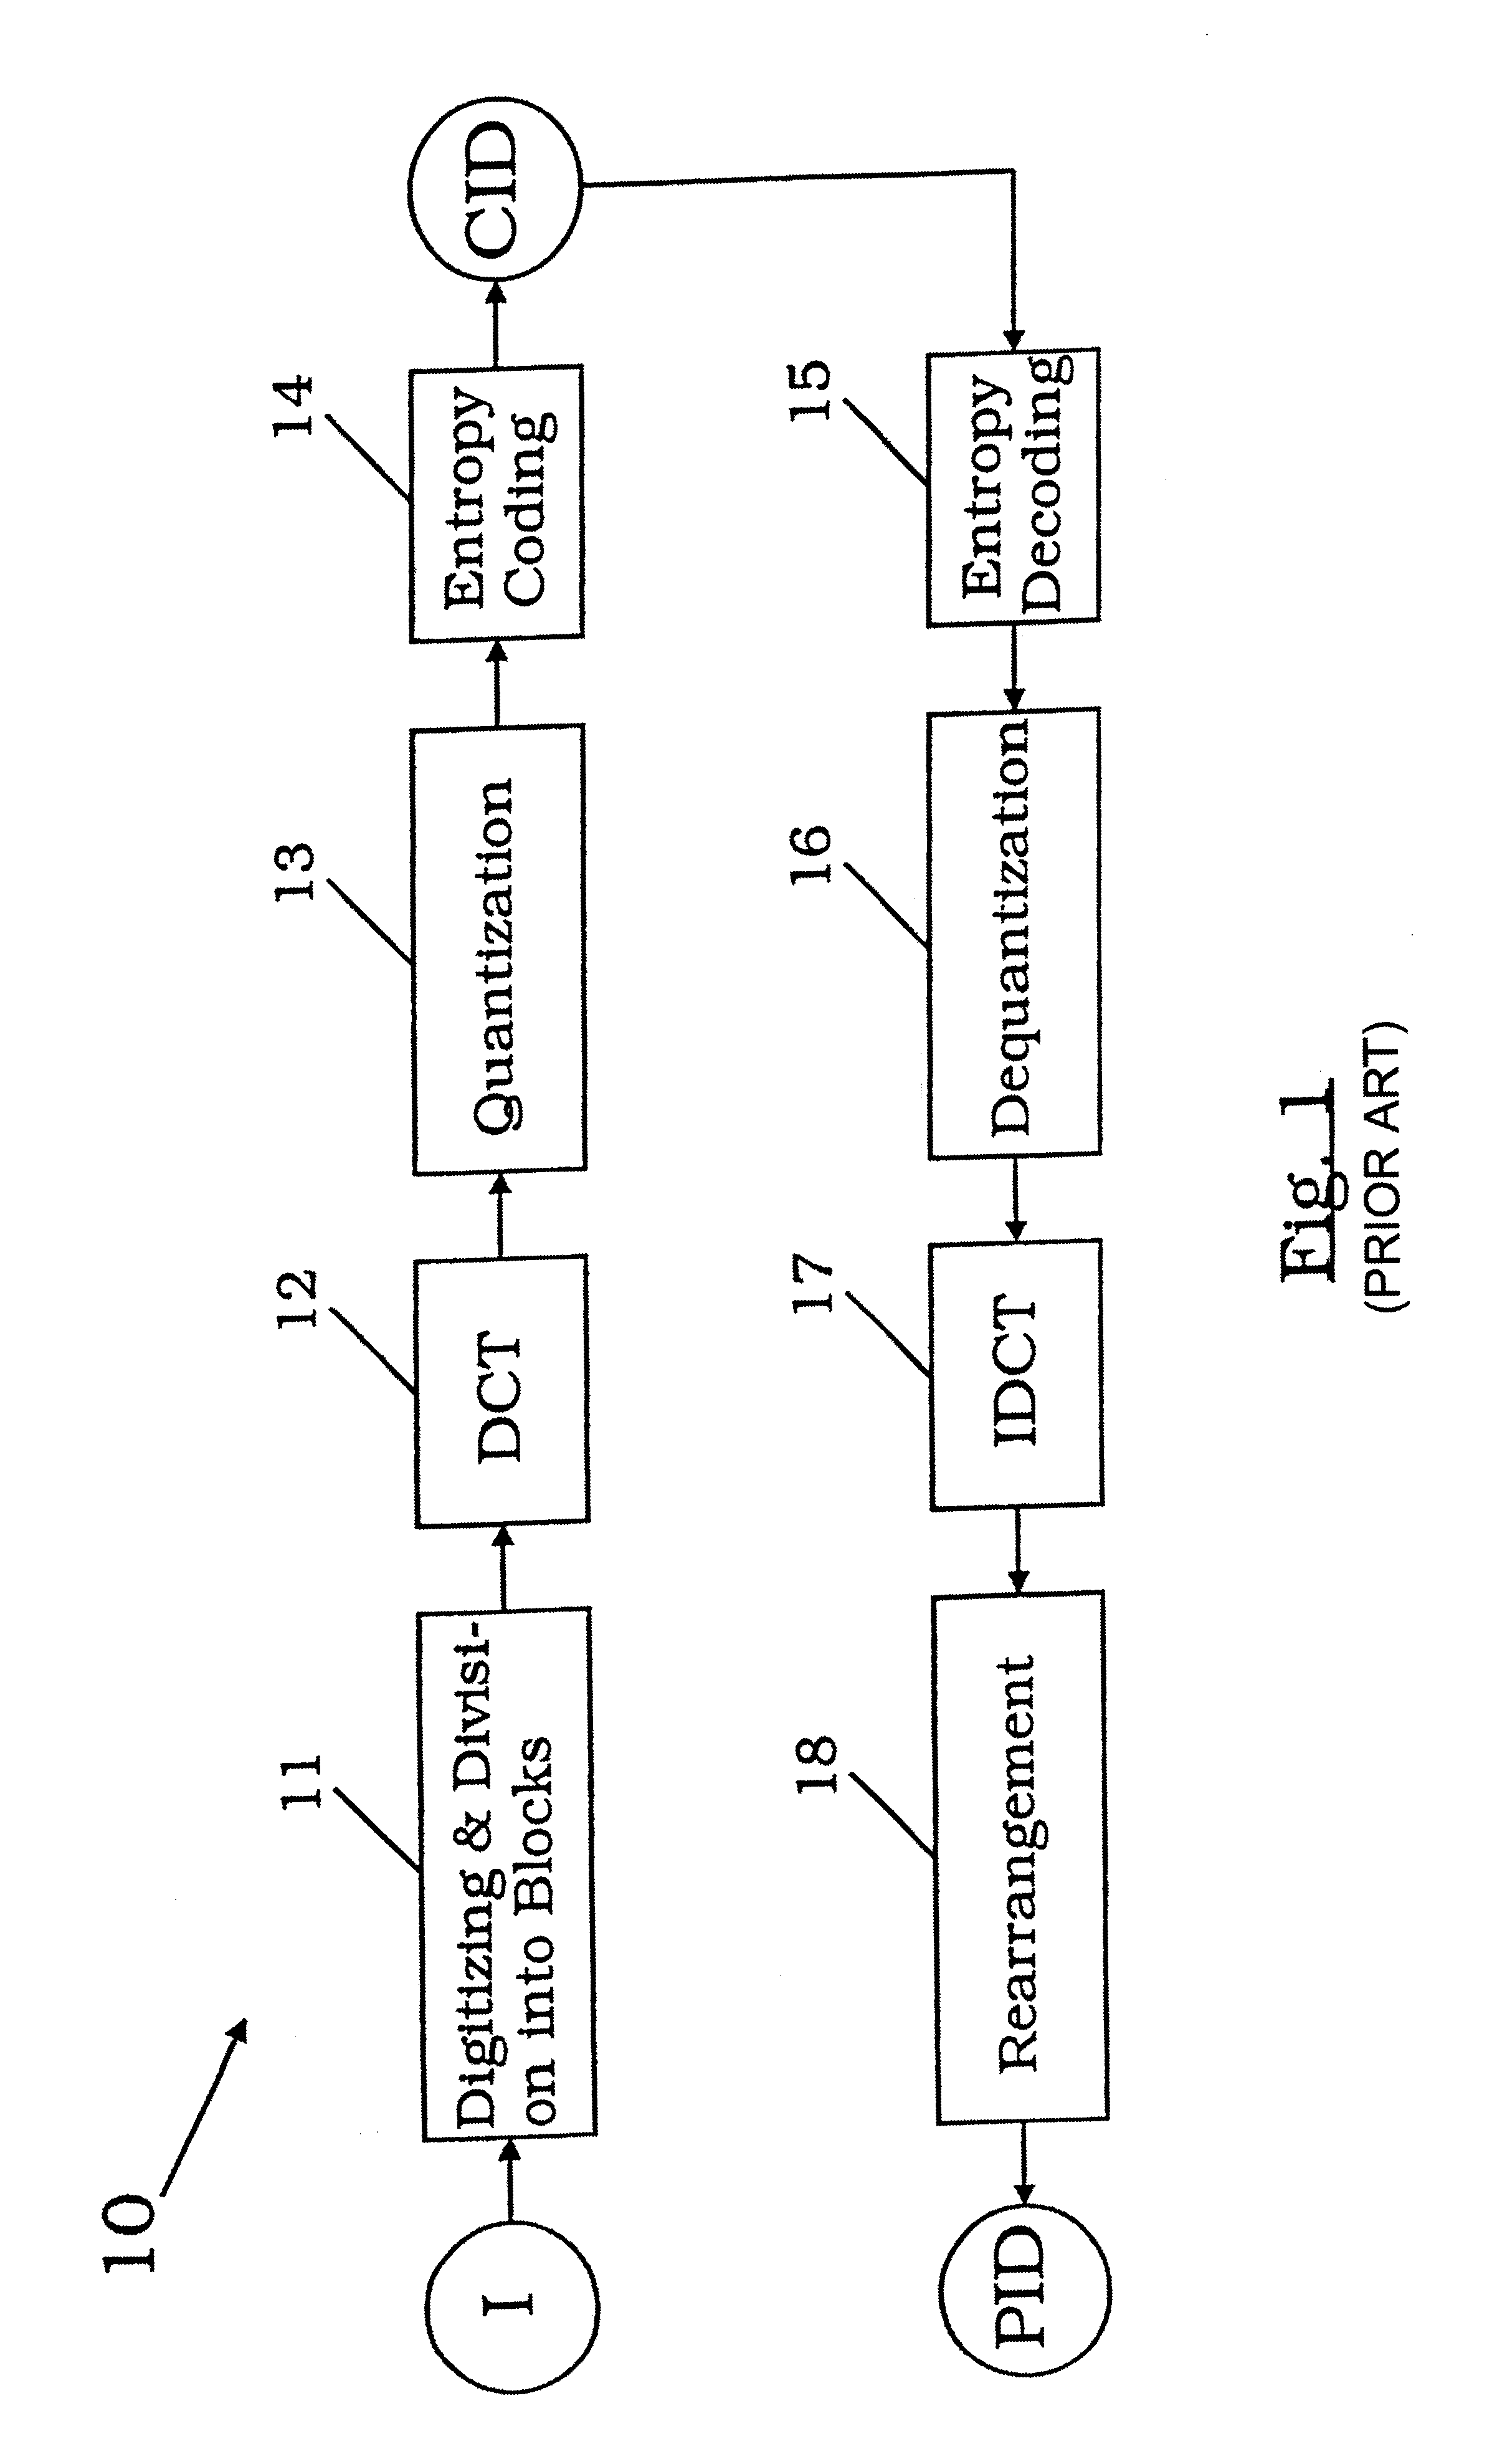 Method for processing compressed image data for reducing blocking artifacts